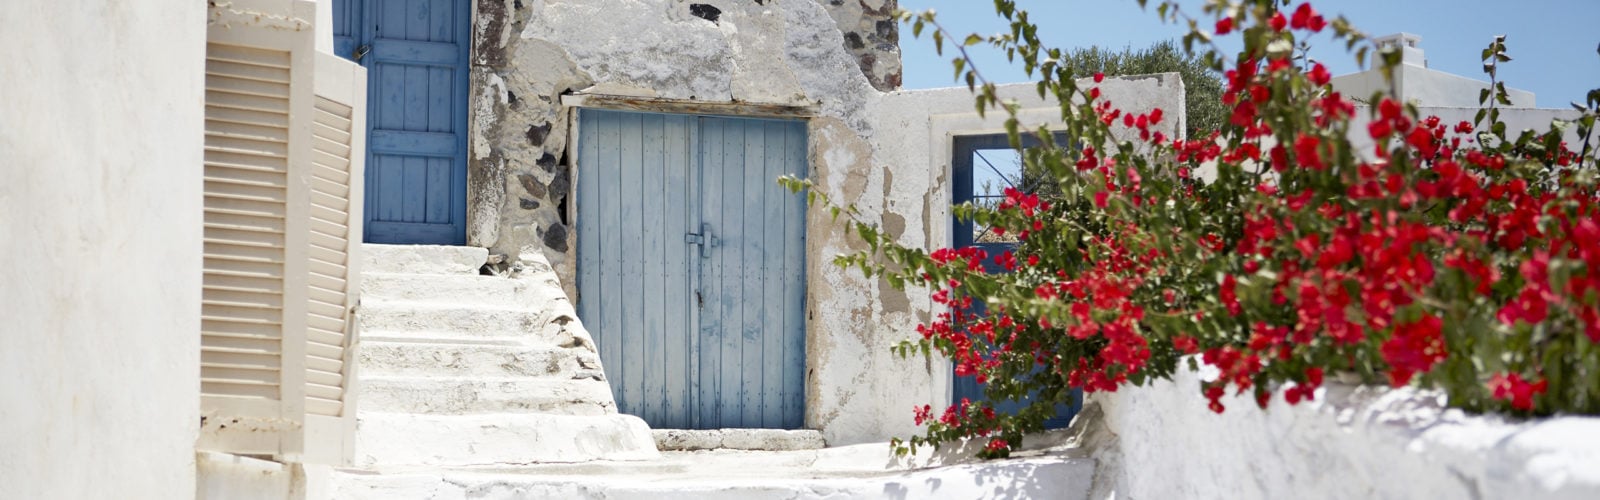 Red bouganvellia set against whitewashed stone building with blue wooden doors